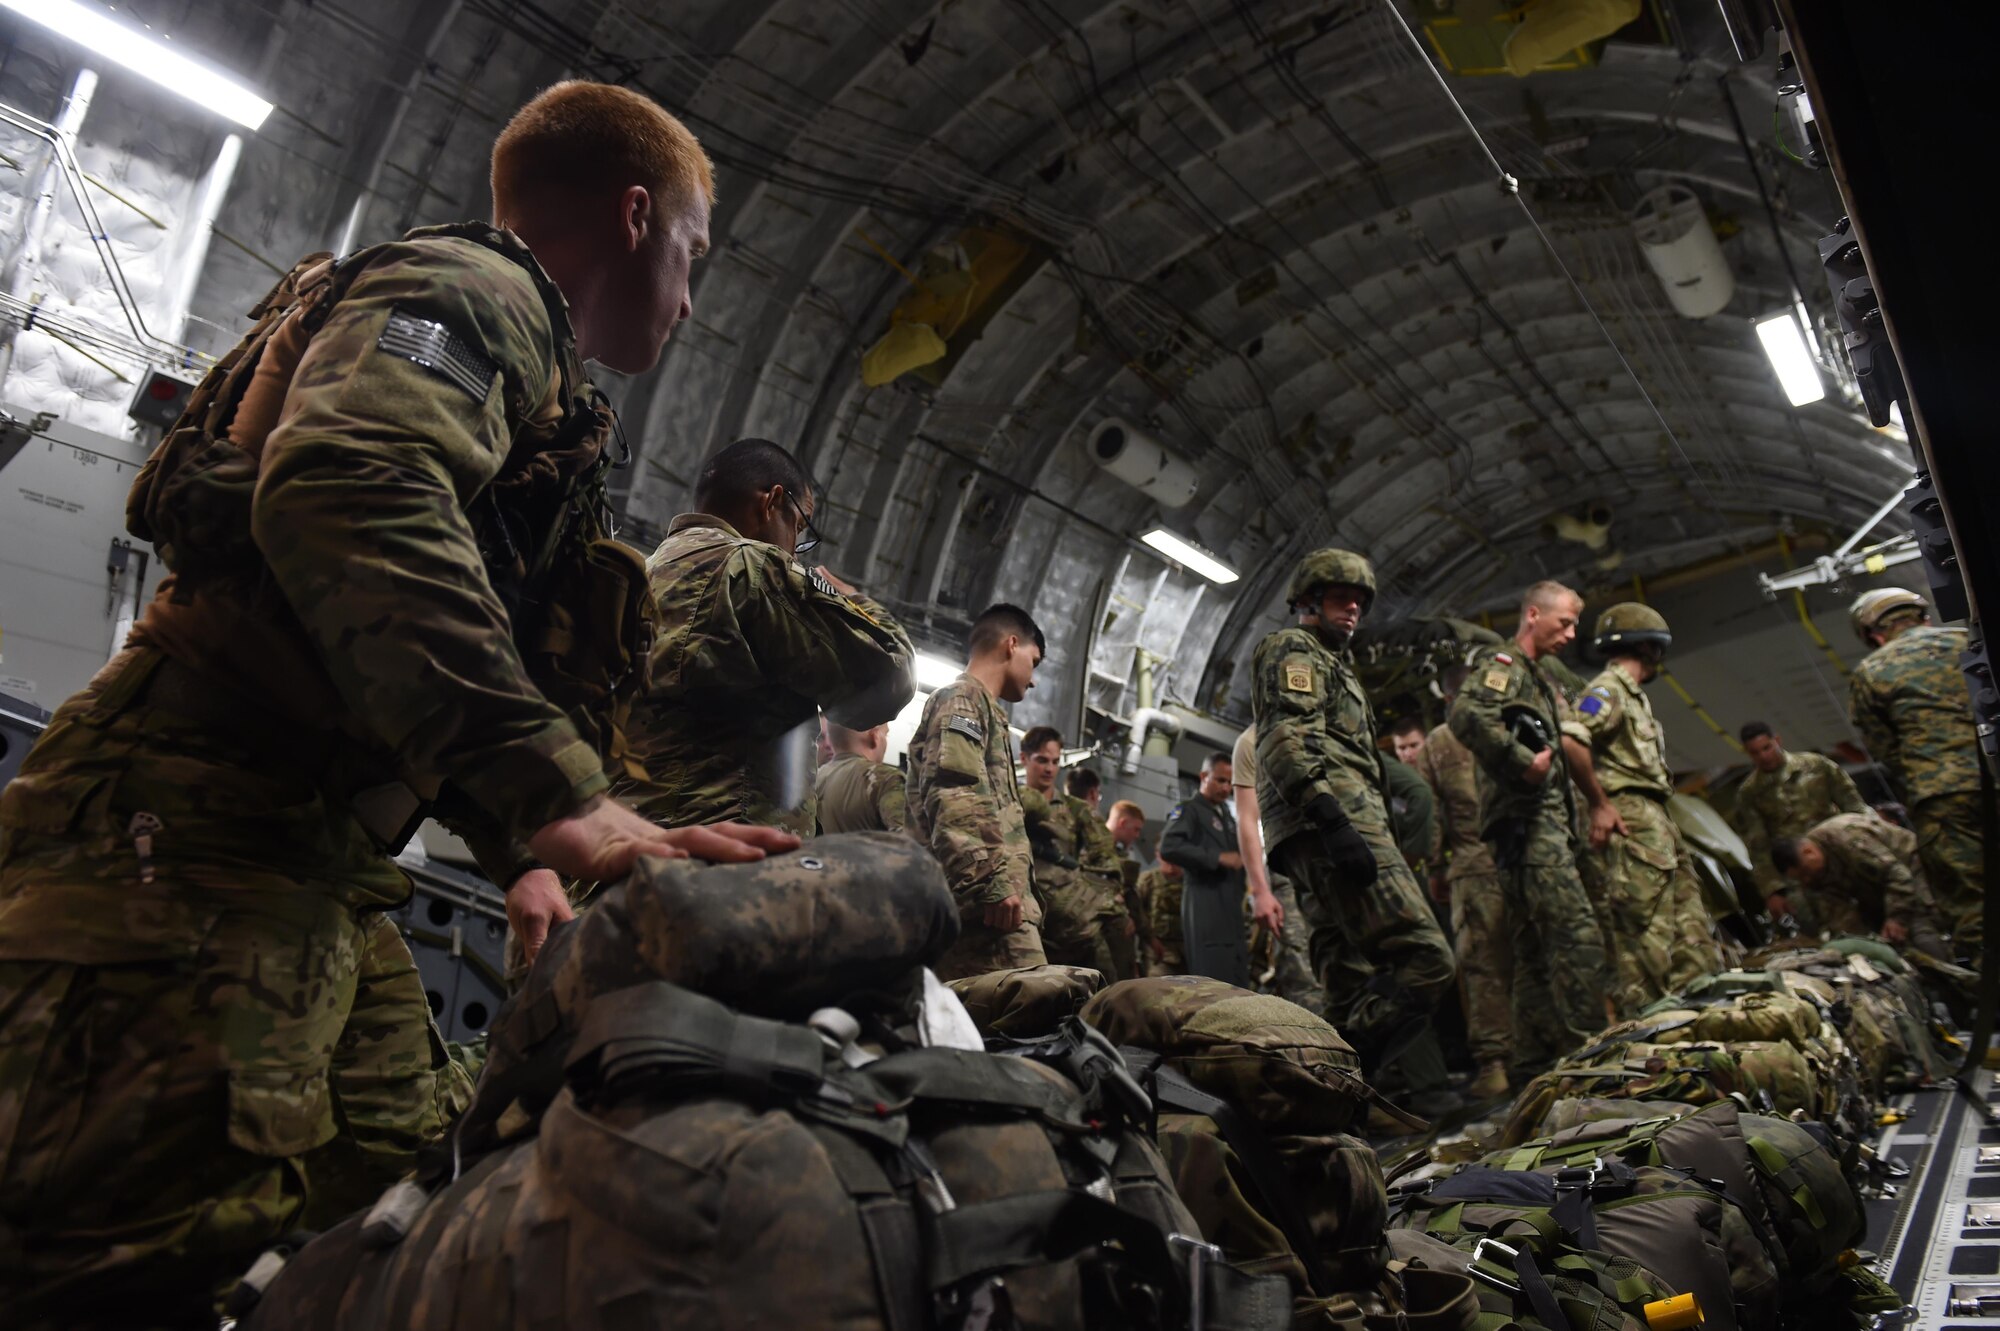 Paratroopers with the 82nd Airborne Division load their equipment into a 62nd Airlift Wing C-17 Globemaster III on Pope Army Air Field, N.C. on June 6, 2016. More than 80 paratroopers from U.S., British and Polish Forces jumped from the C-17 into Poland as part of Exercise Swift Response 2016. (Air Force photo/Staff Sgt. Naomi Shipley)